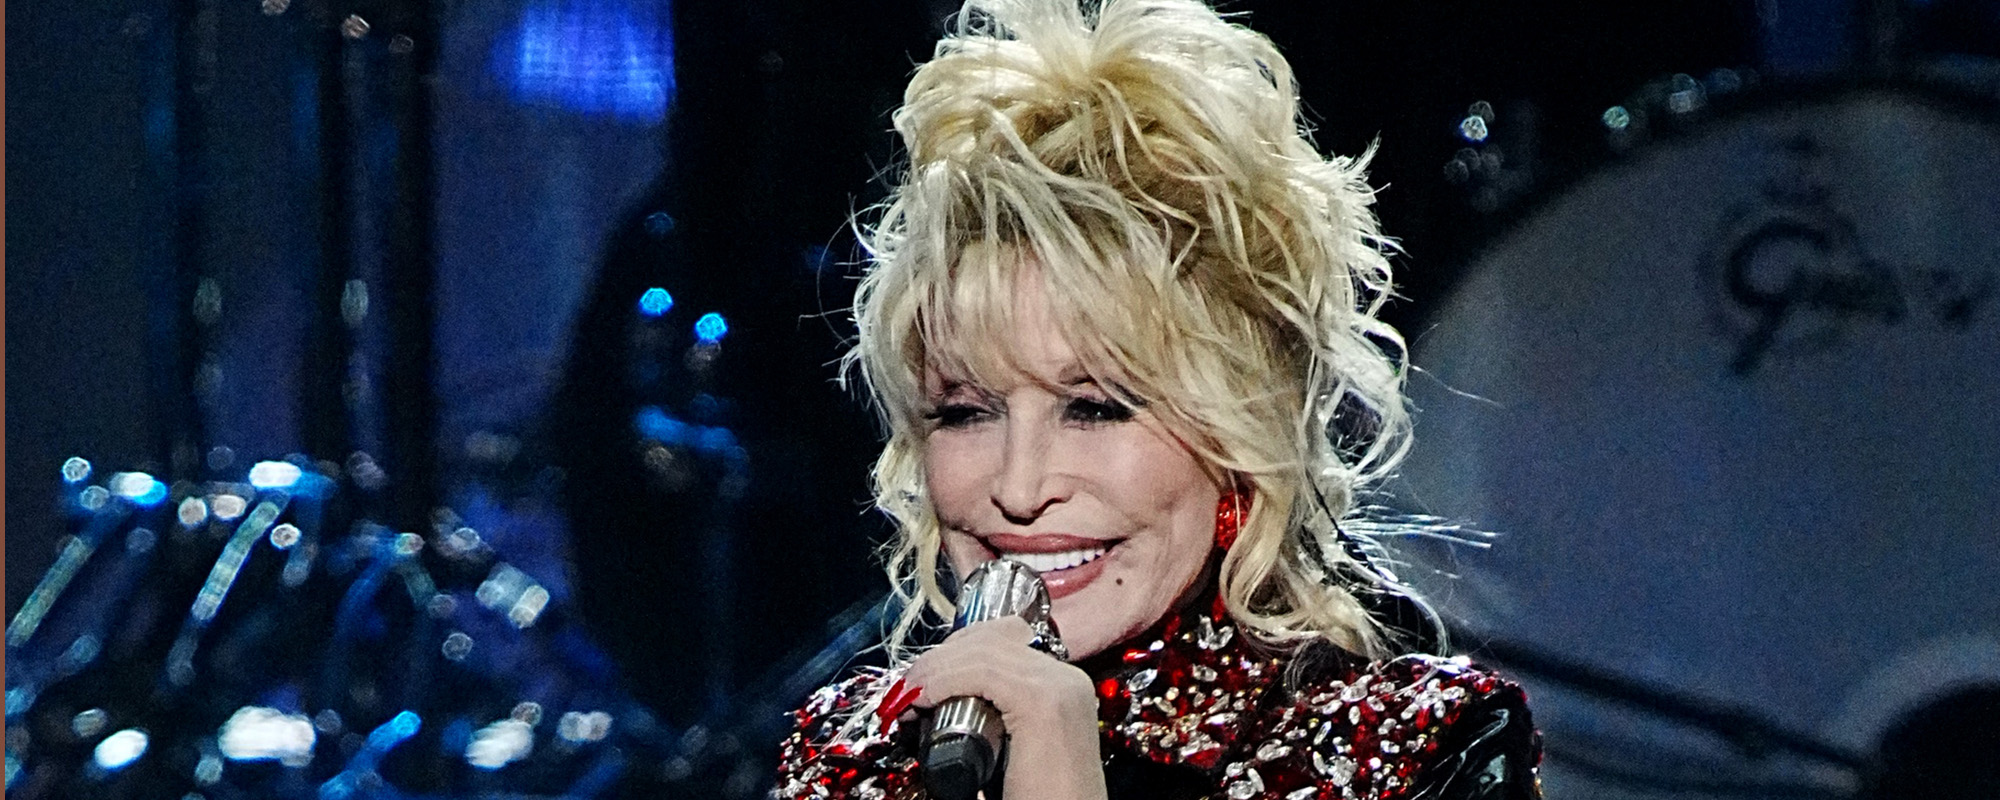 Dolly Parton’s Real Life Musical Family—From 11 Siblings to the Next Generation